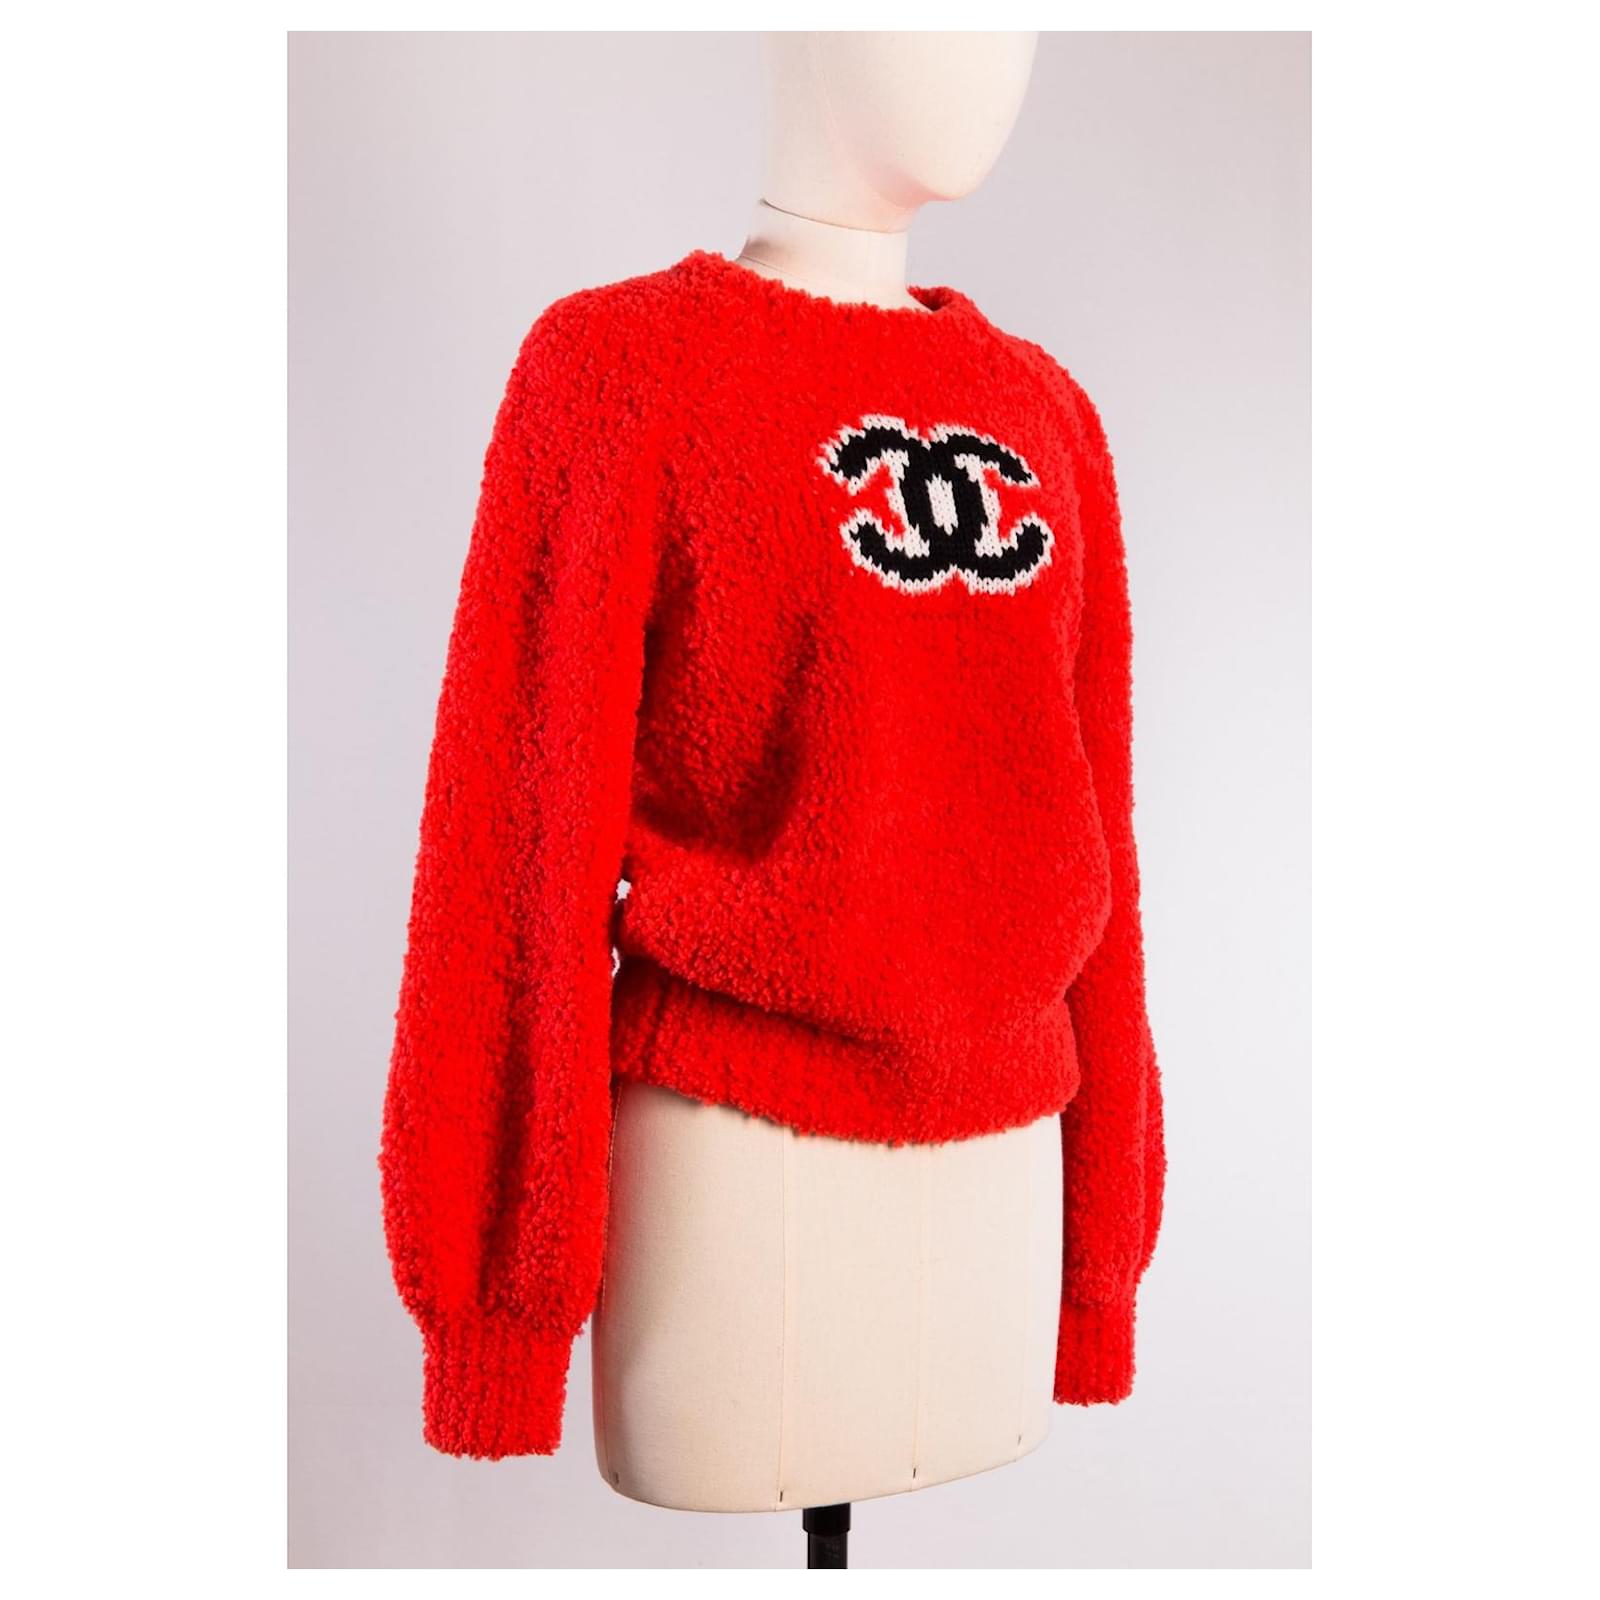 Chanel CHANEL CC RED TEDDY SWEATER